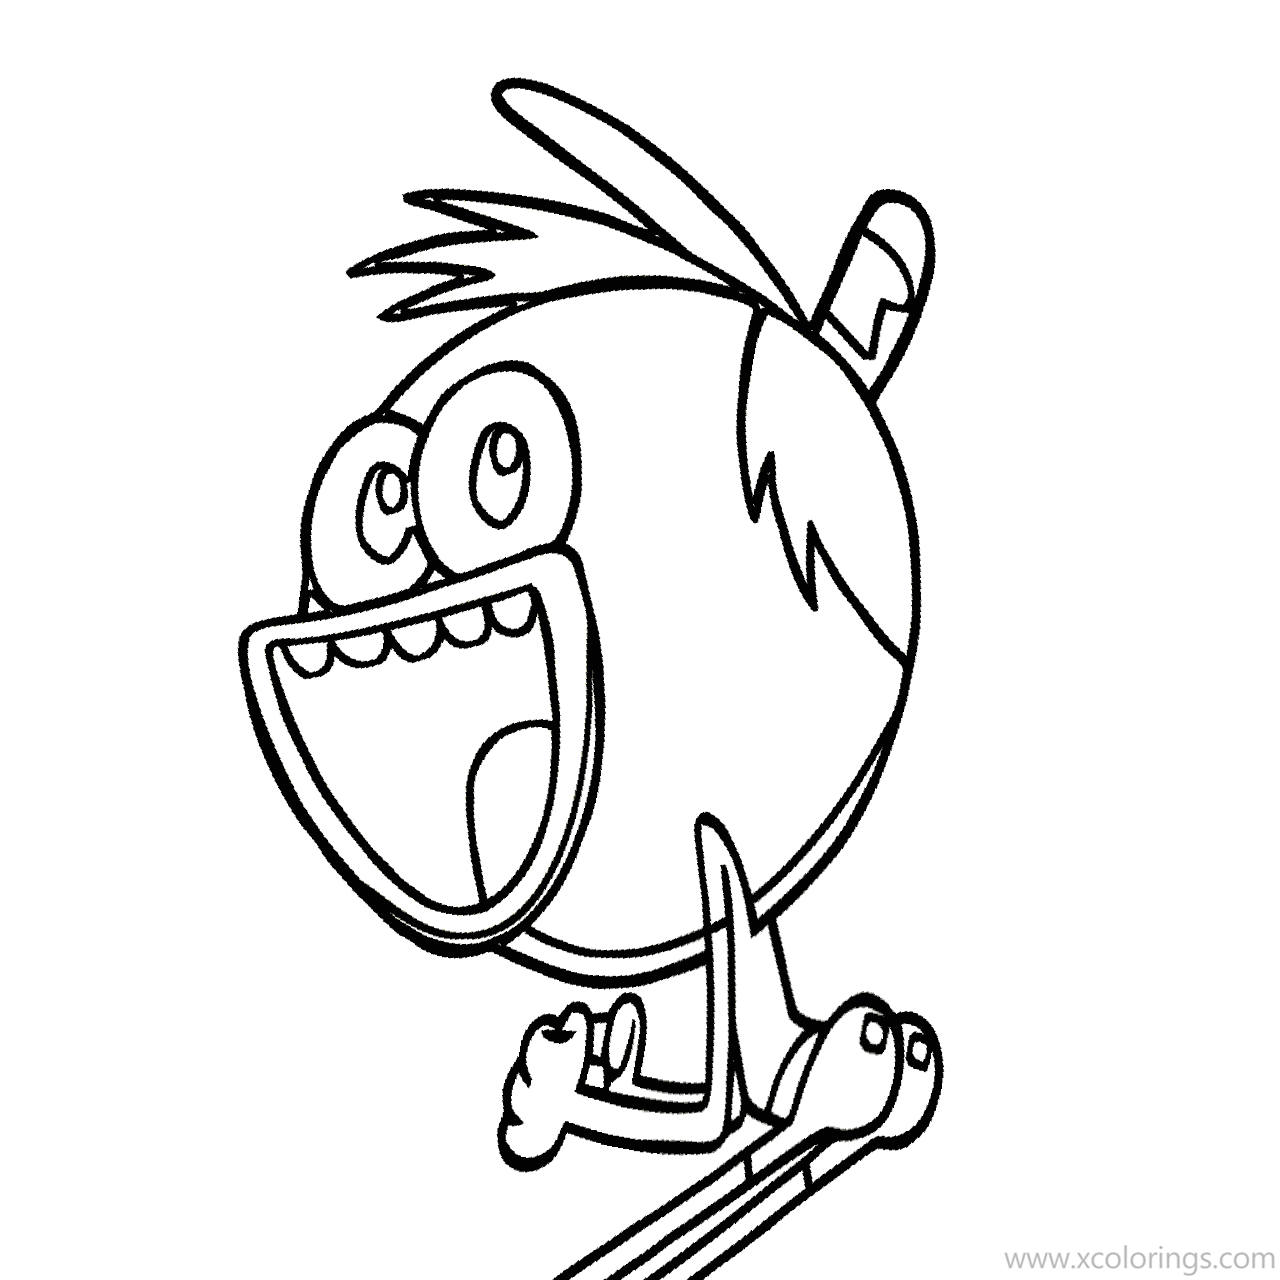 Free Breadwinners Coloring Pages SwaySway Shaking His Butt printable